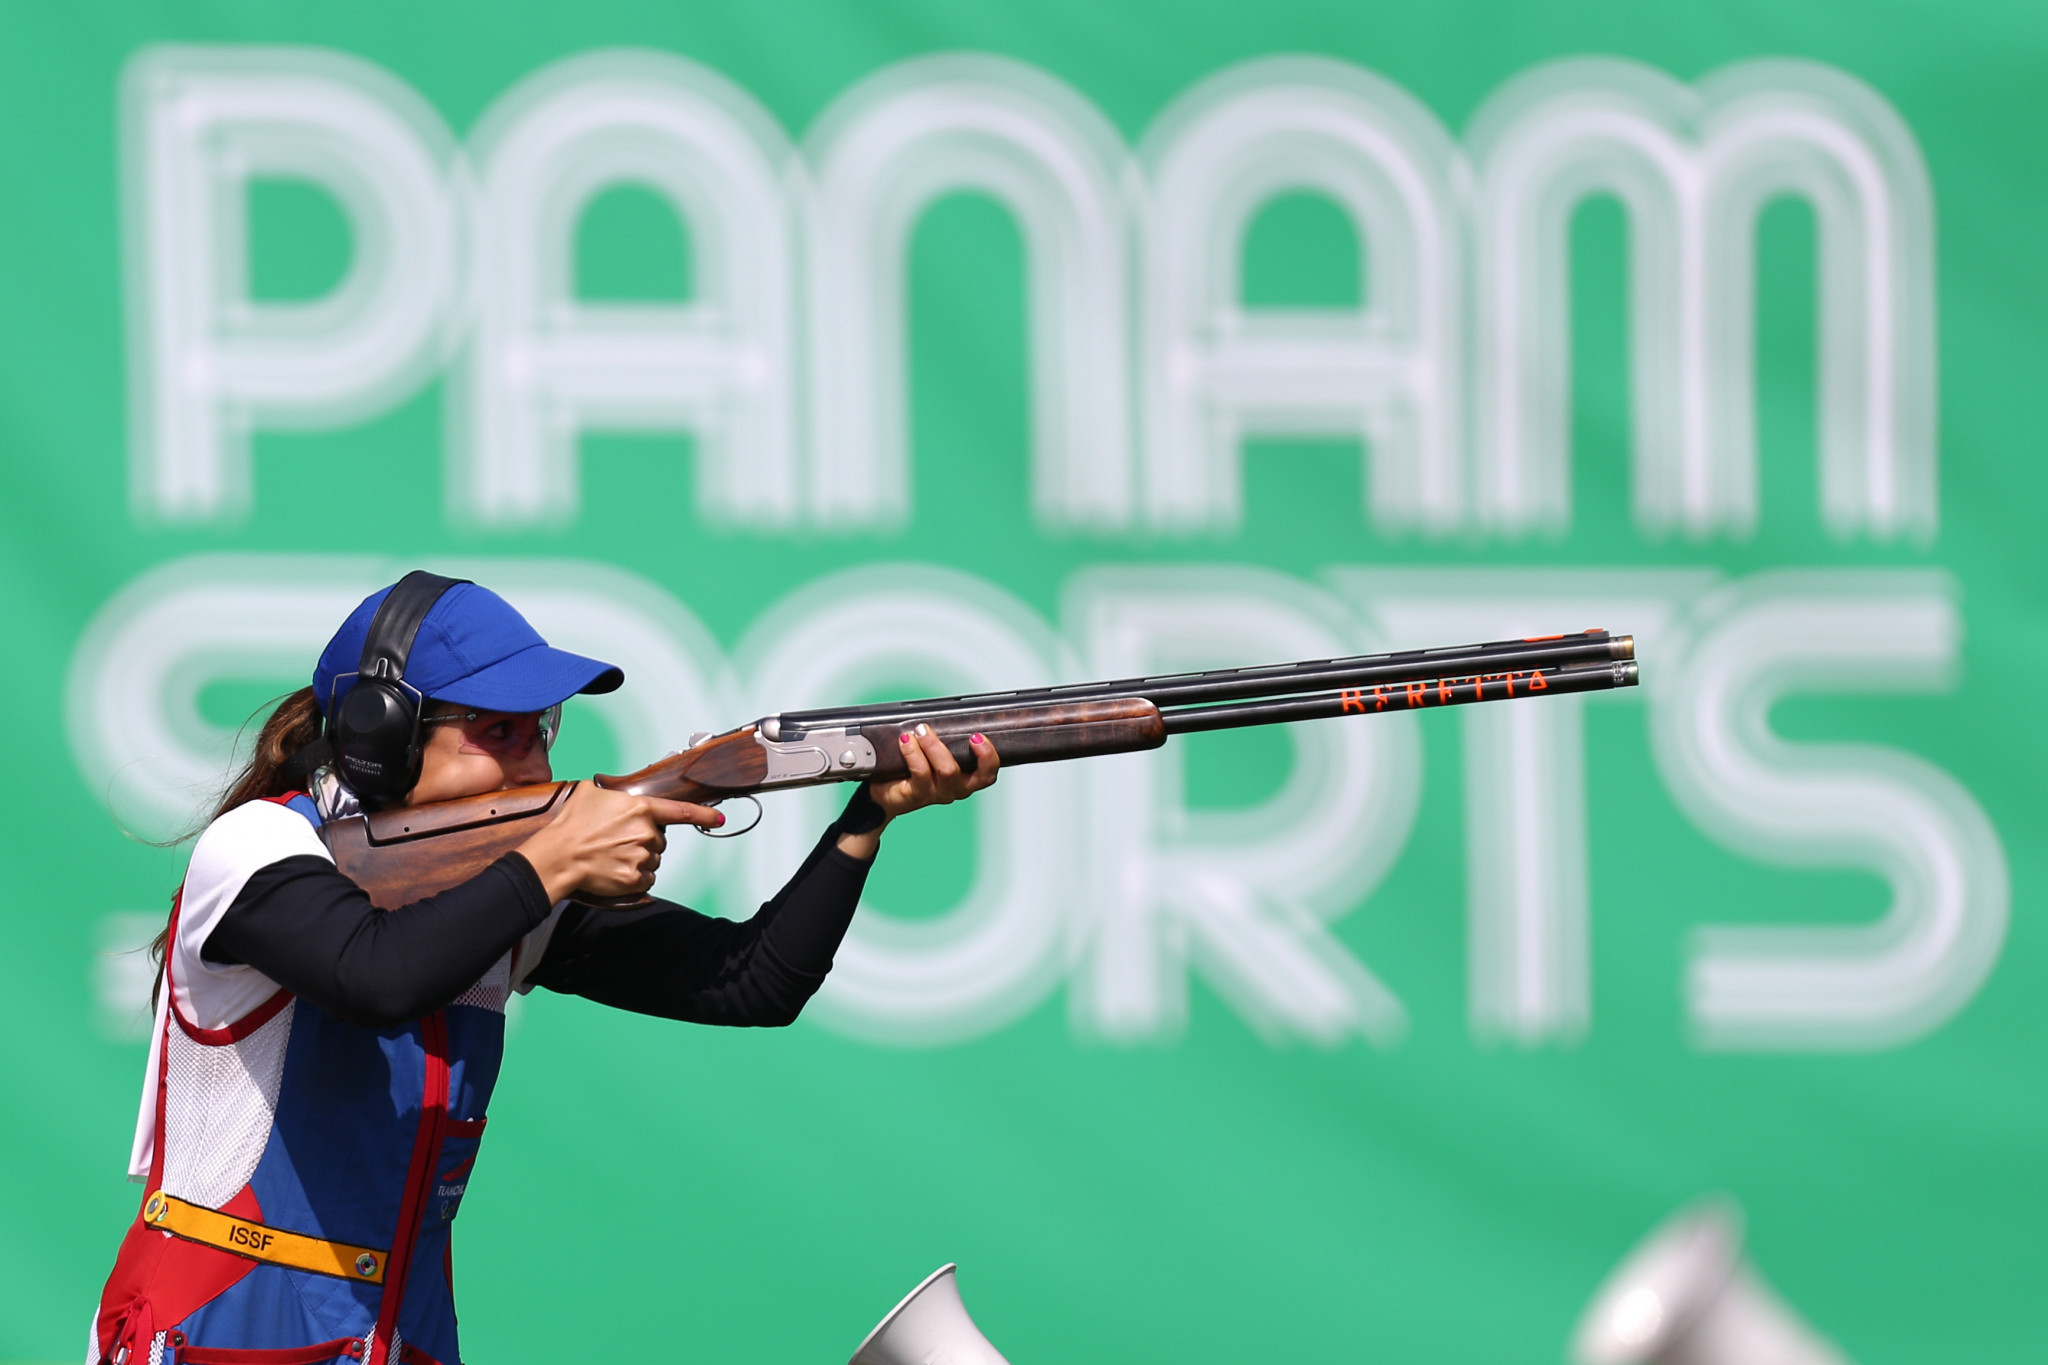 Chile's Francisca Crovetto Chadid, the silver medallist at the 2019 Pan American Games in Peru's capital Lima earlier this month, occupies second spot ©Getty Images